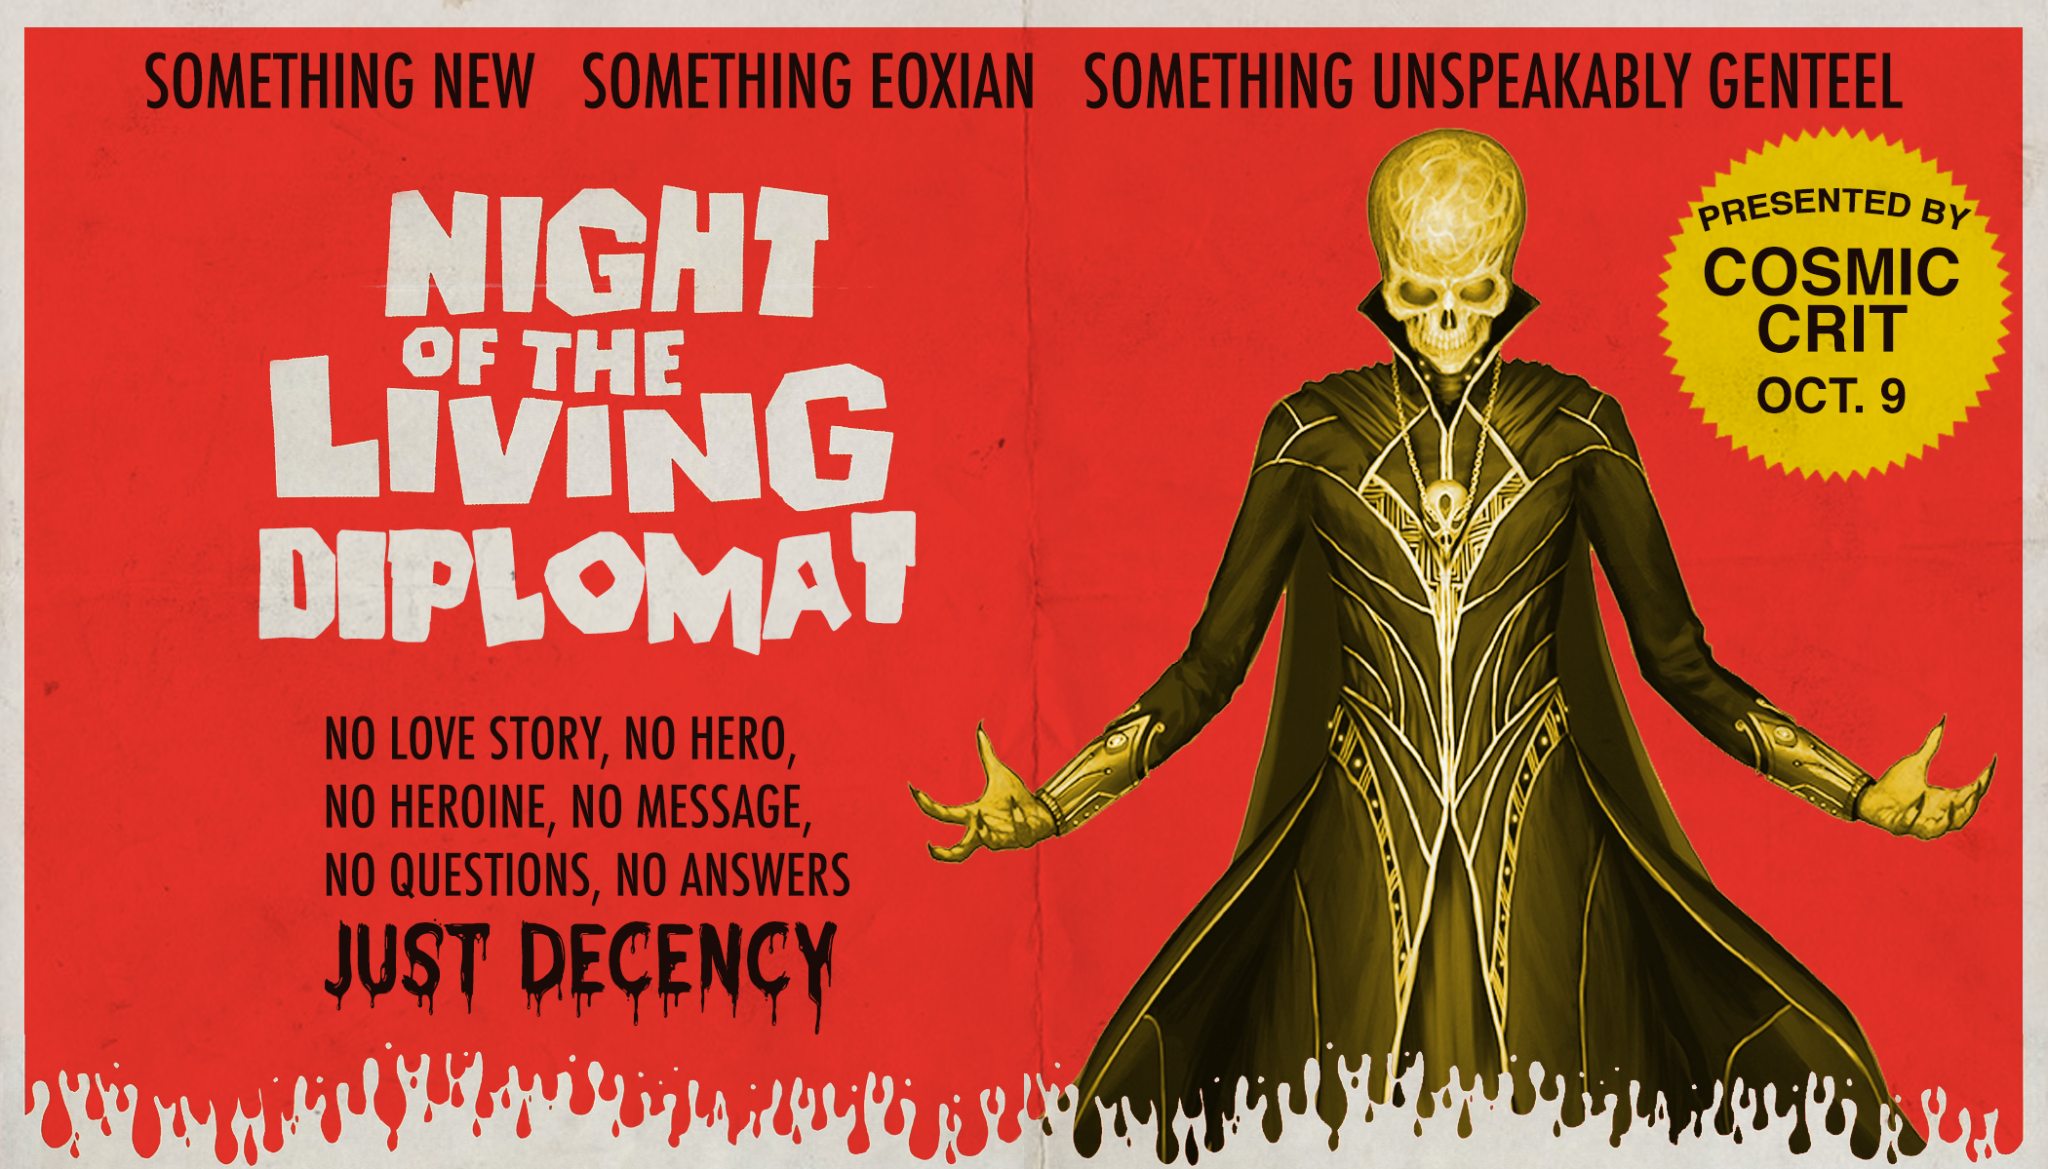 009: Night of the Living Diplomat